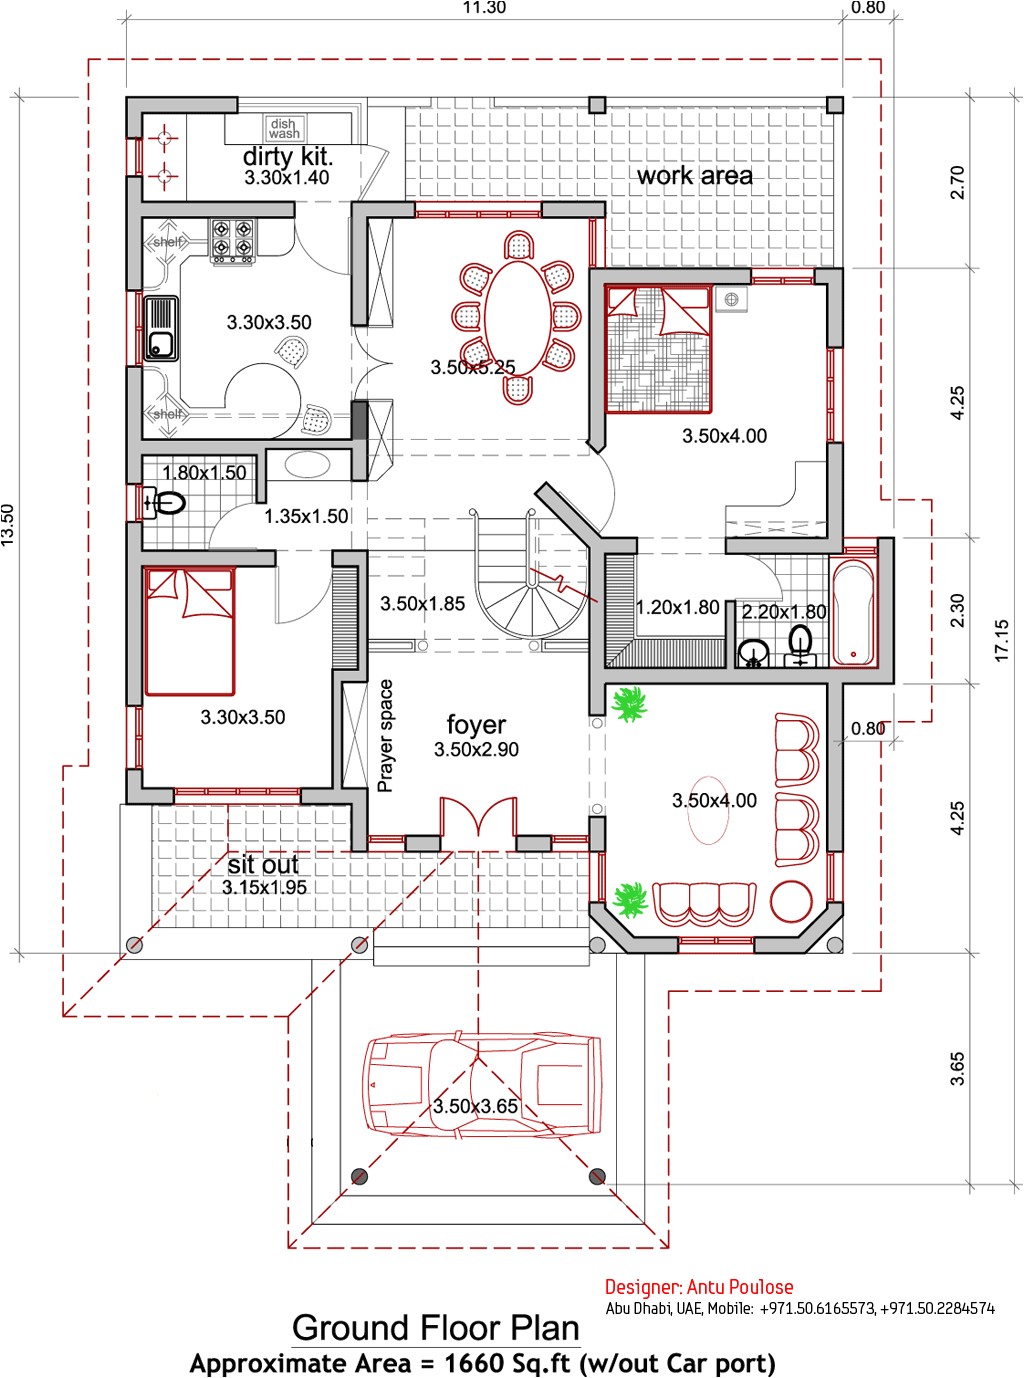 Kerala Home Floor Plans Traditional Kerala House Plan and Elevation 2165 Sq Ft